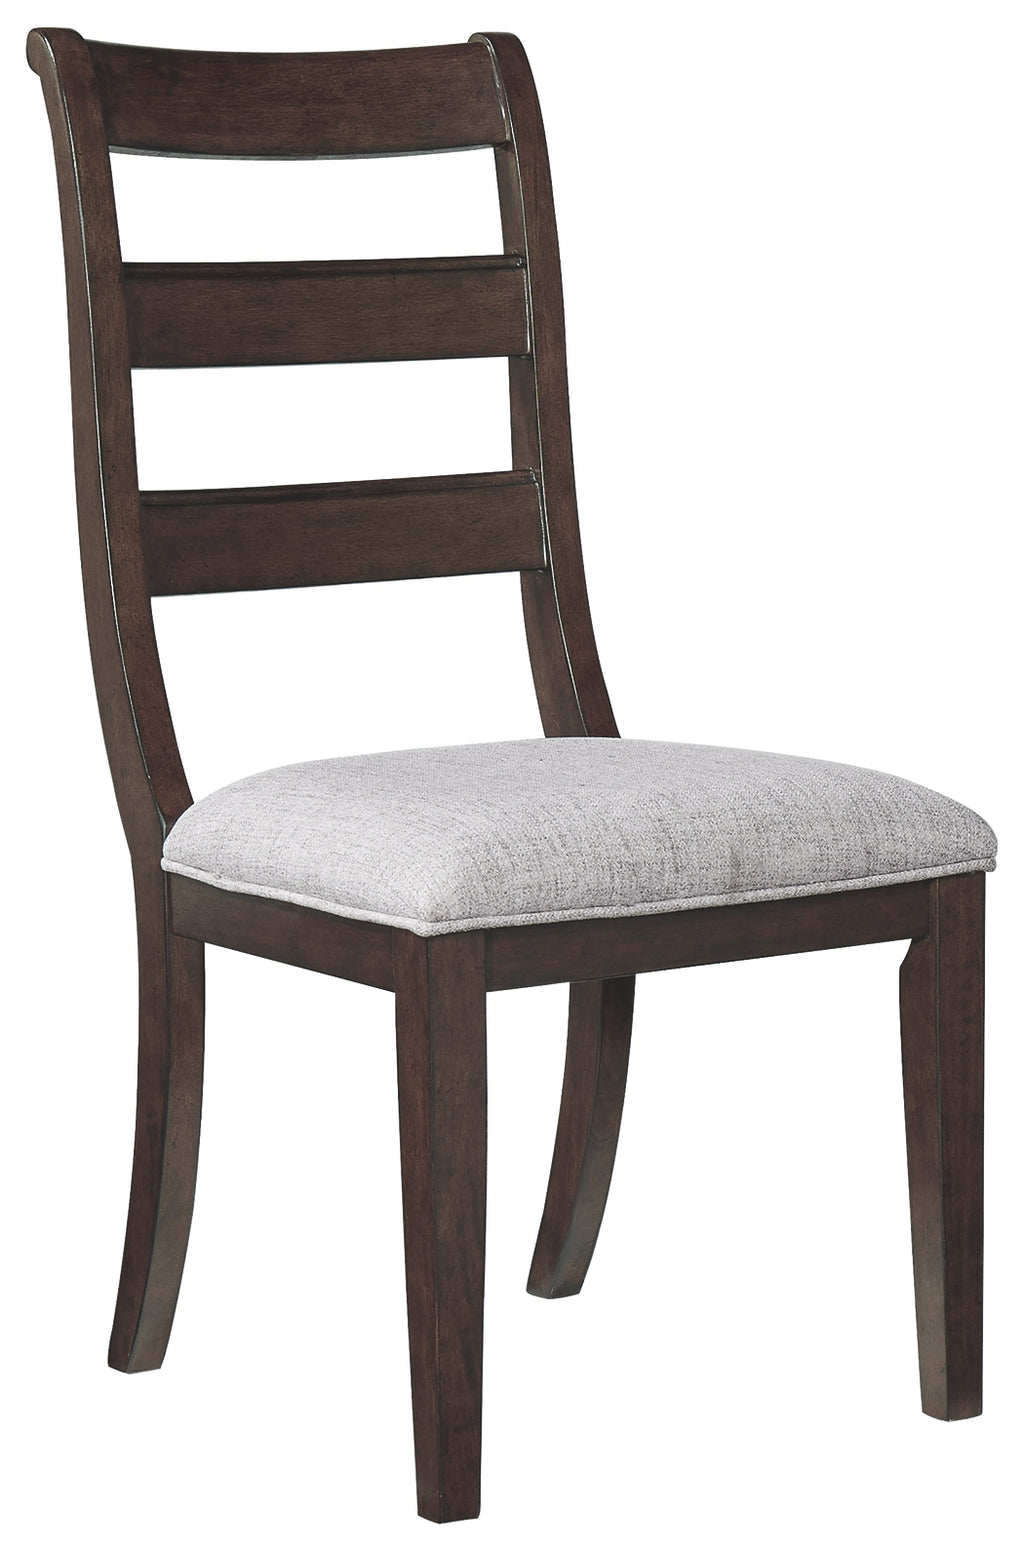 Adinton D677-01 Reddish Brown Dining UPH Side Chair 2CN